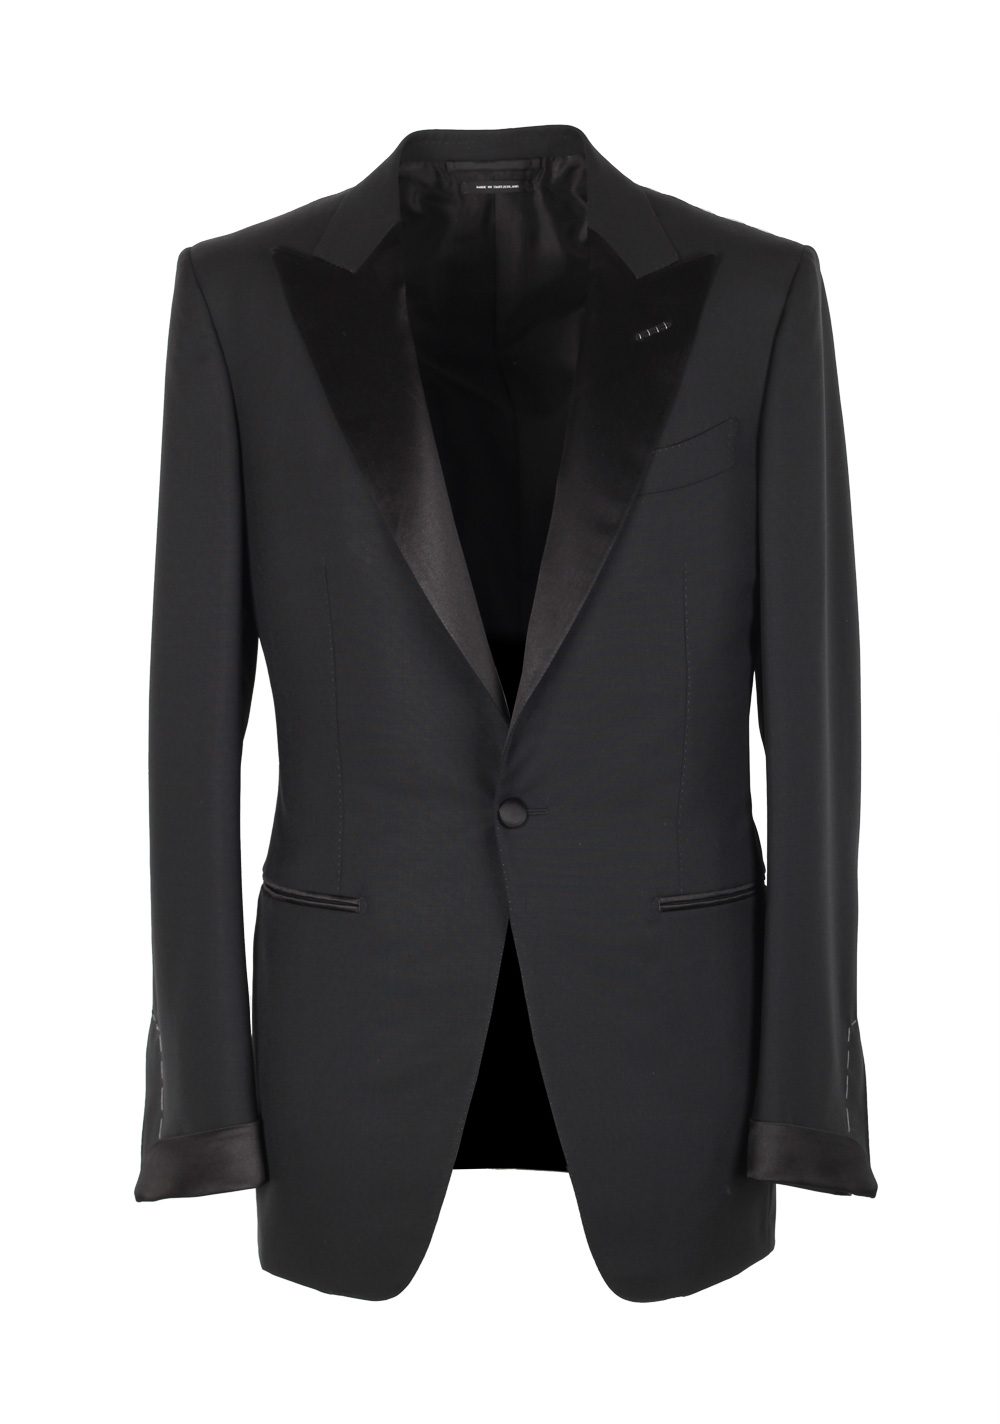 TOM FORD O’Connor Black Tuxedo Suit Smoking Size 48 / 38R U.S. Fit Y ...